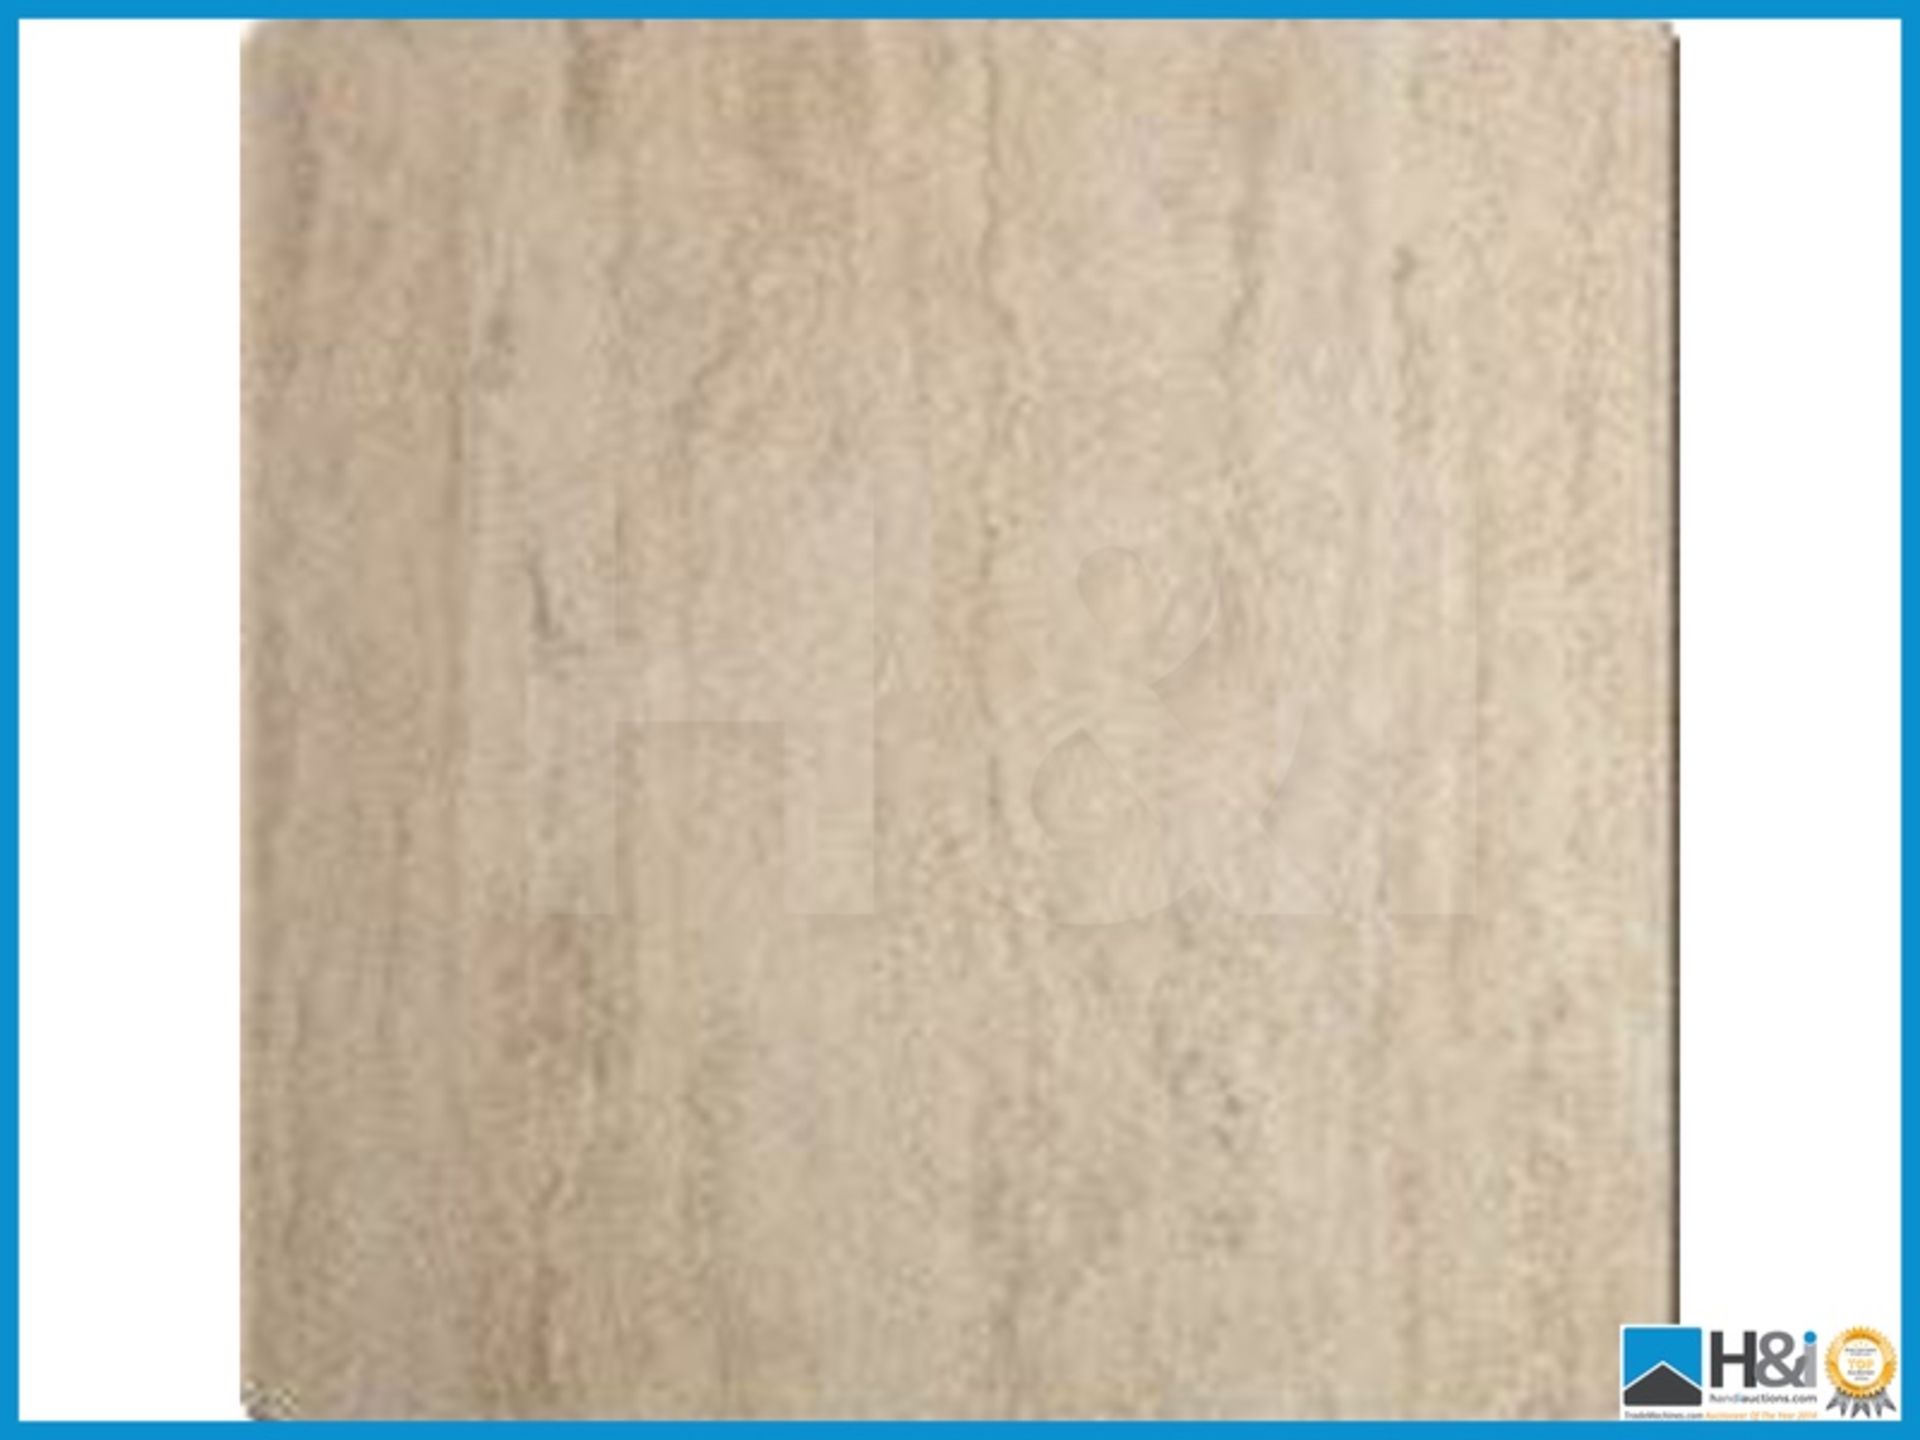 Designer travertine wet room panel 1000x2400. New and boxed. Suggested manufacturers selling - Image 2 of 2